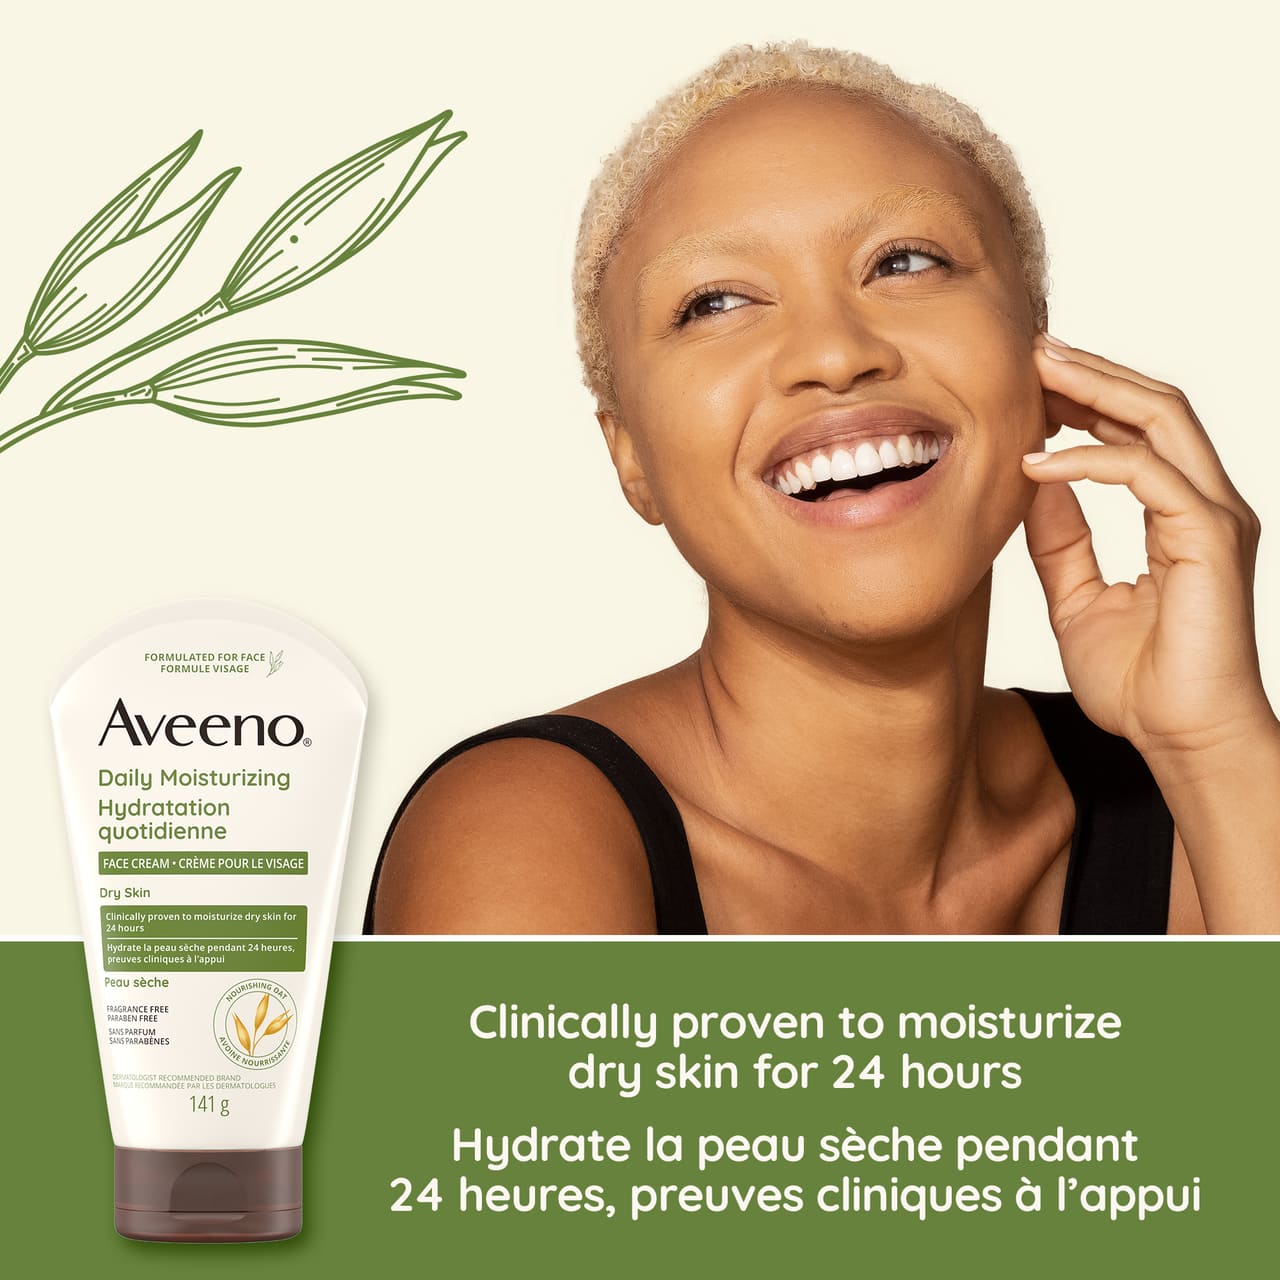 Woman smiling with Aveeno Daily Moisturizing Face Cream tube and text stating 'Clinically proven to moisturize dry skin for 24hrs'.